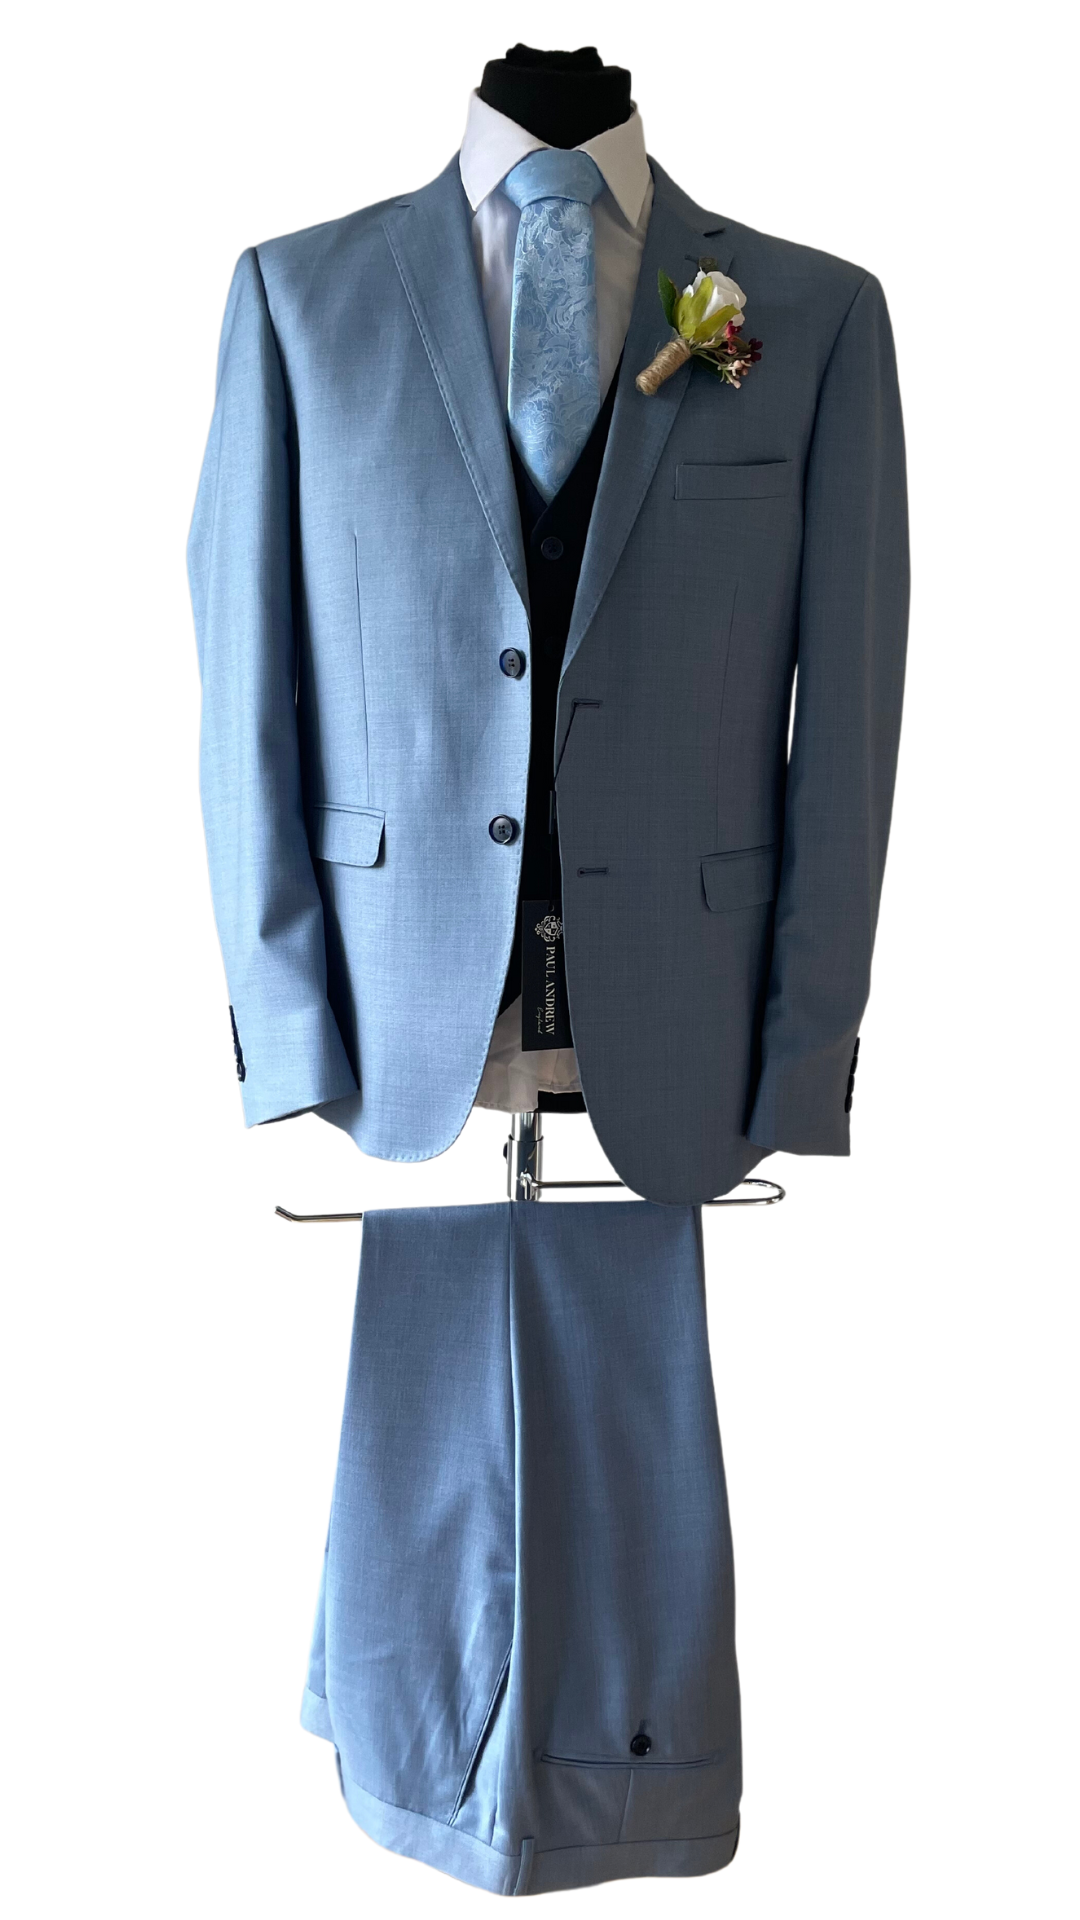 Paul Andrew Charles Blue suit with Navy waistcoat